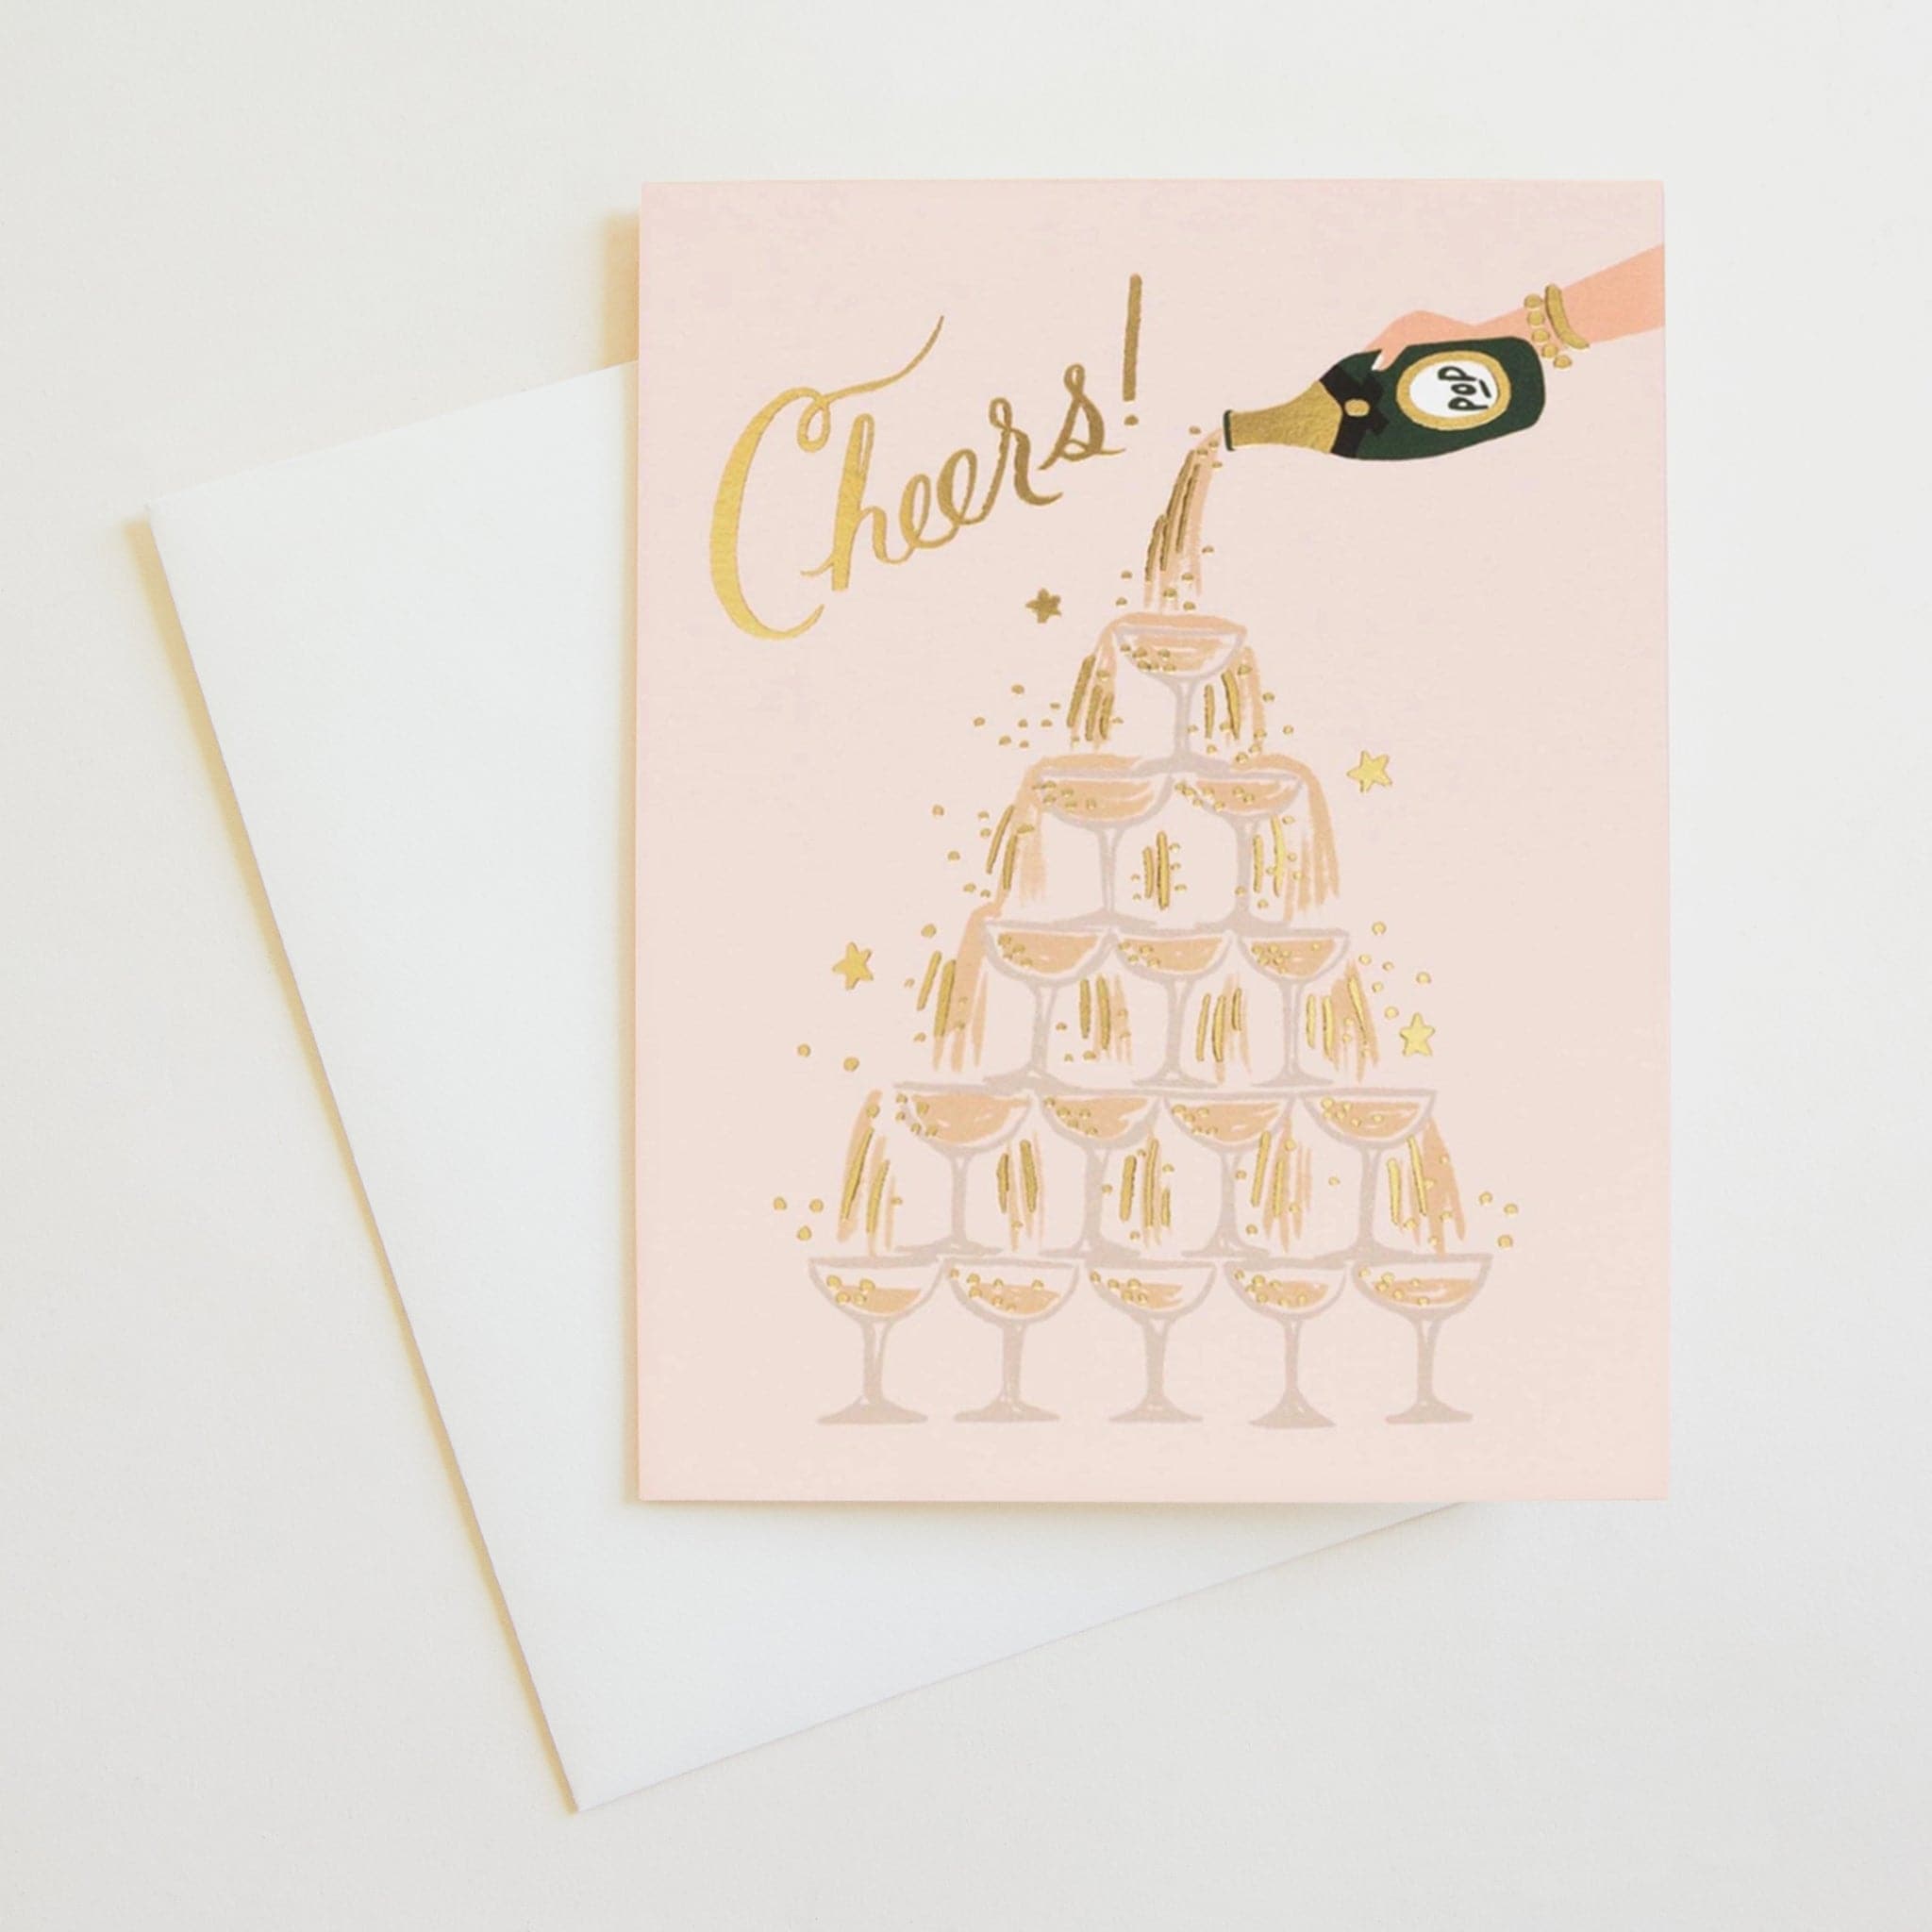 A celebration card! With Gold foil accents, this card features a champagne tower flowing with bubbly accented with gold foil. A hand is pouring champagne from the top, where it cascades all the way down. In gold foil cursive is written, "Cheers!". All of this is featured on a light pink background.